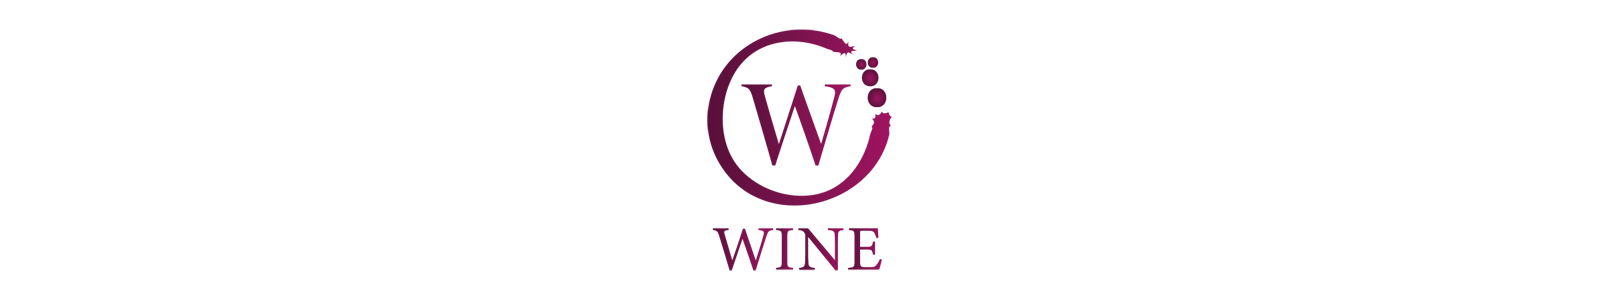 WINE  logo _ with text  banner.png